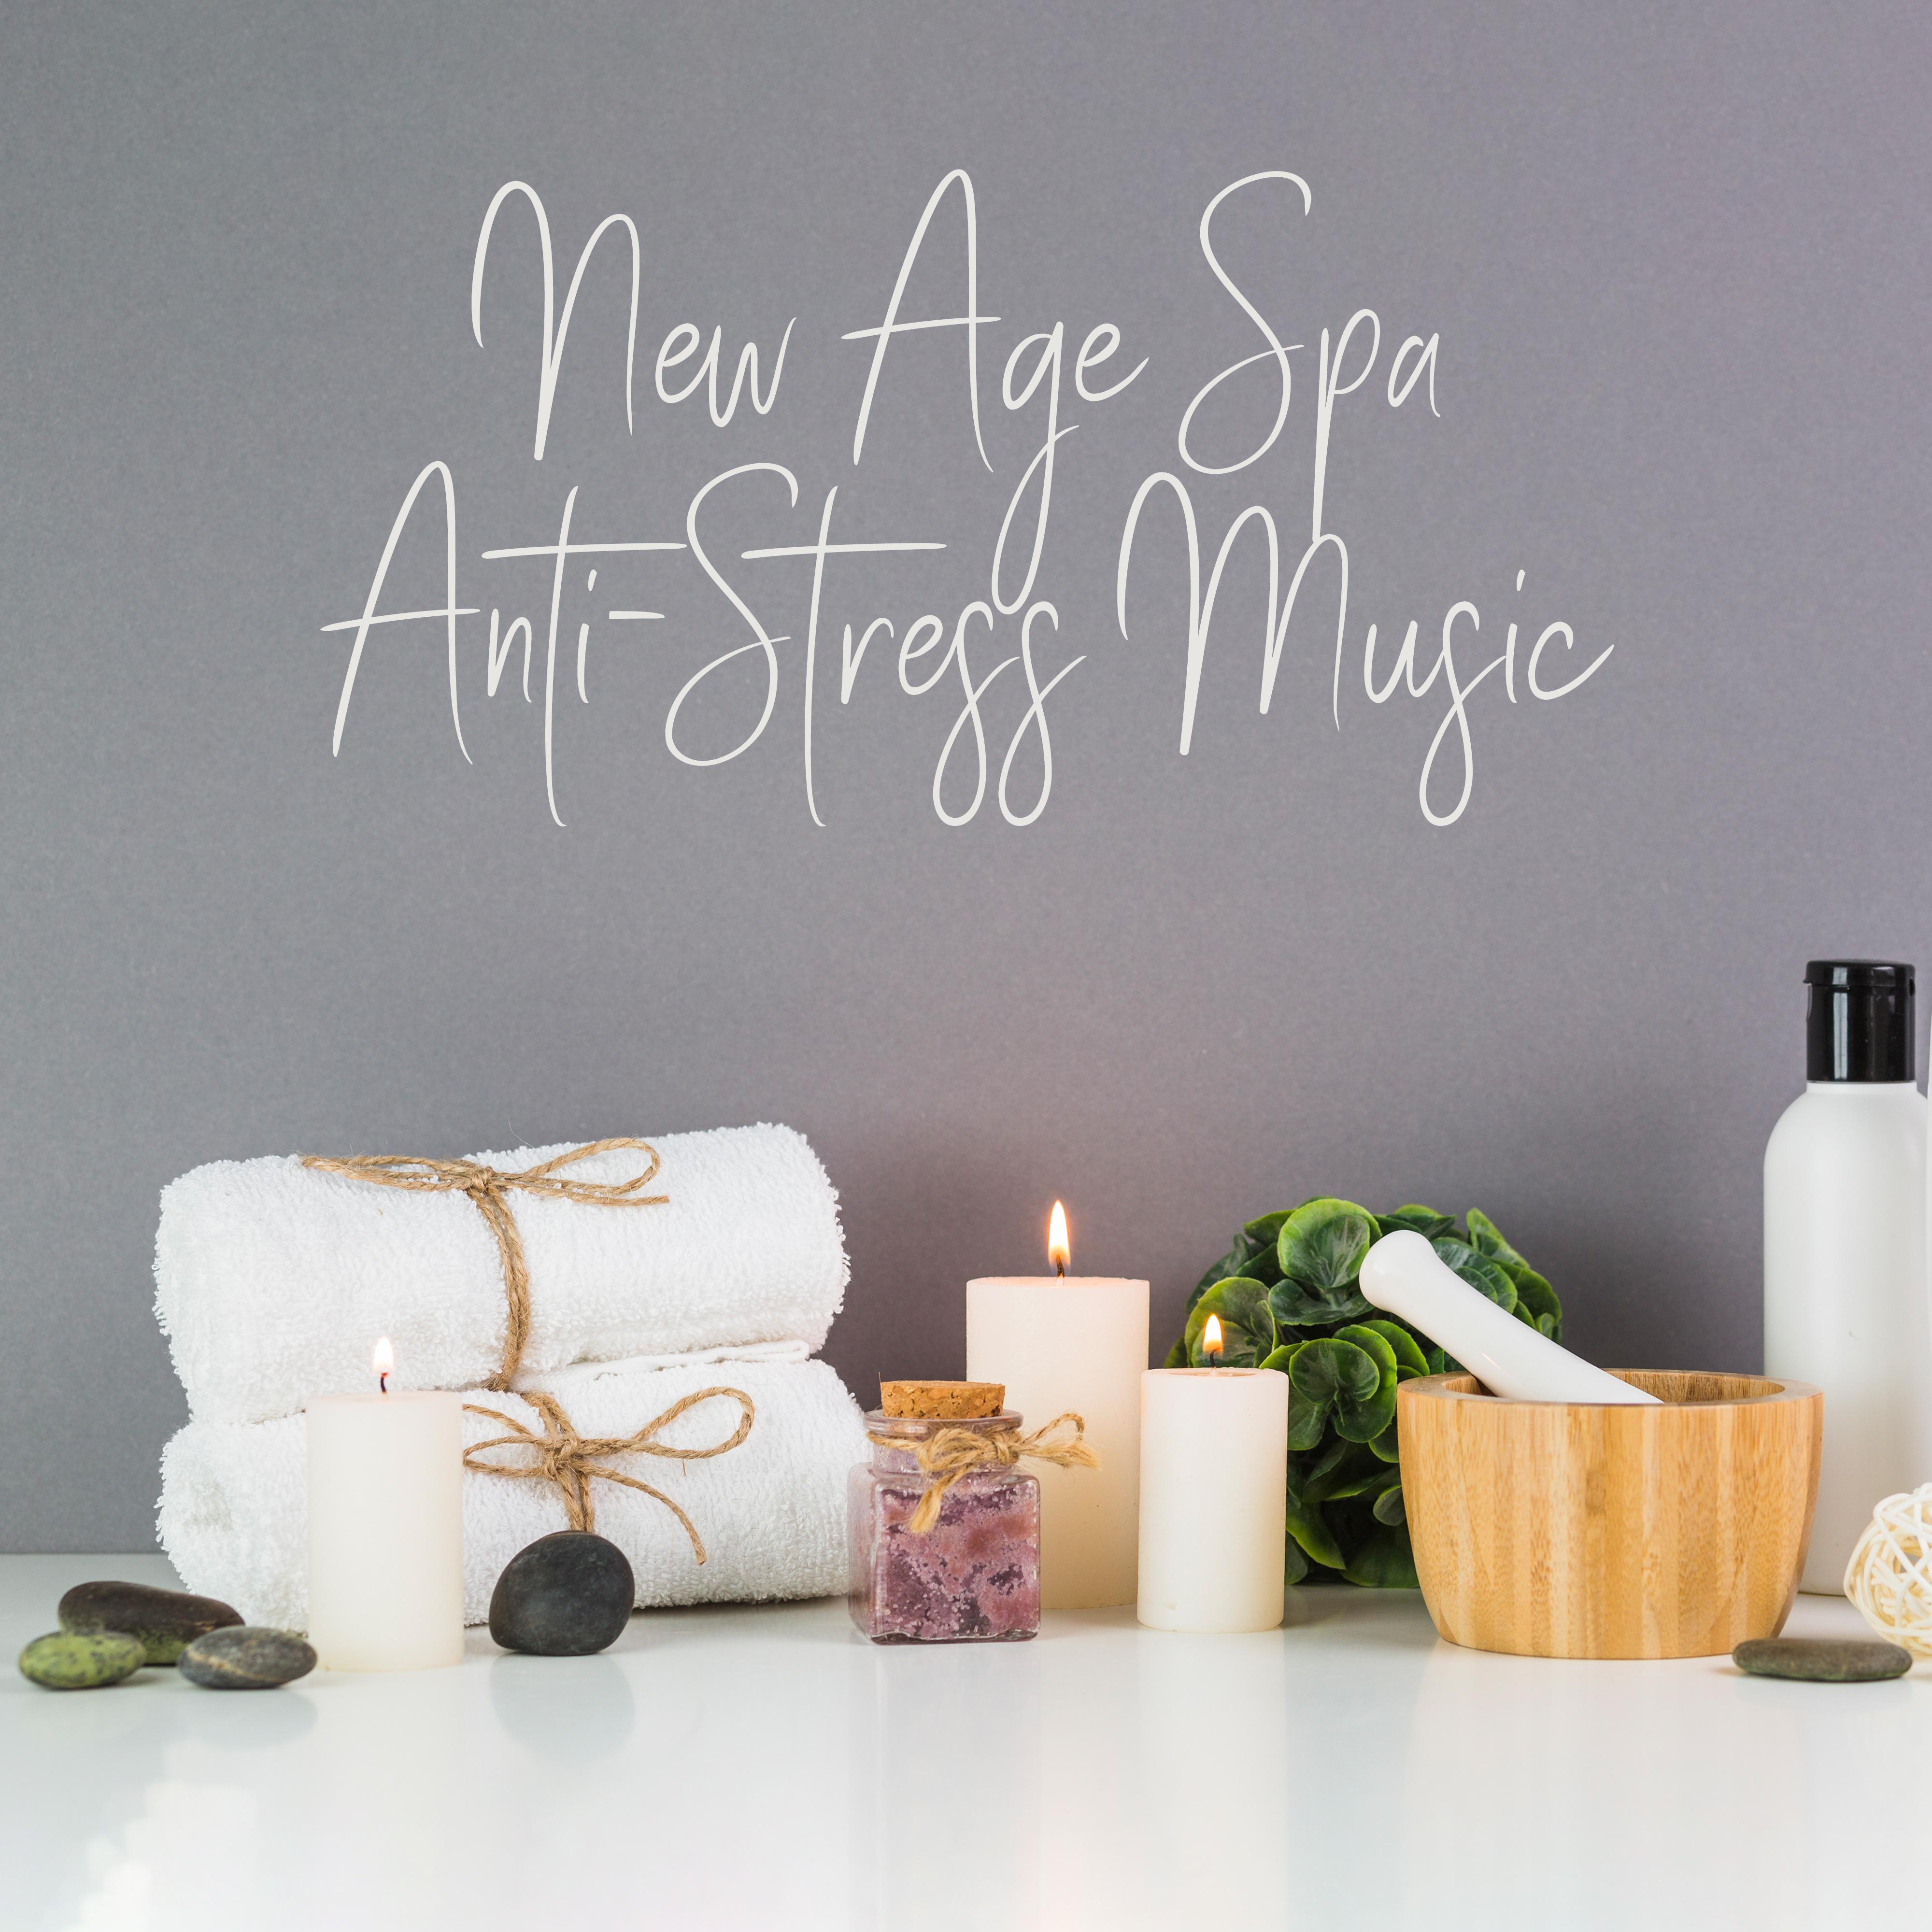 New Age Spa Anti-Stress Music – Perfect Music for Spa & Wellness to Full Body & Mind Relax